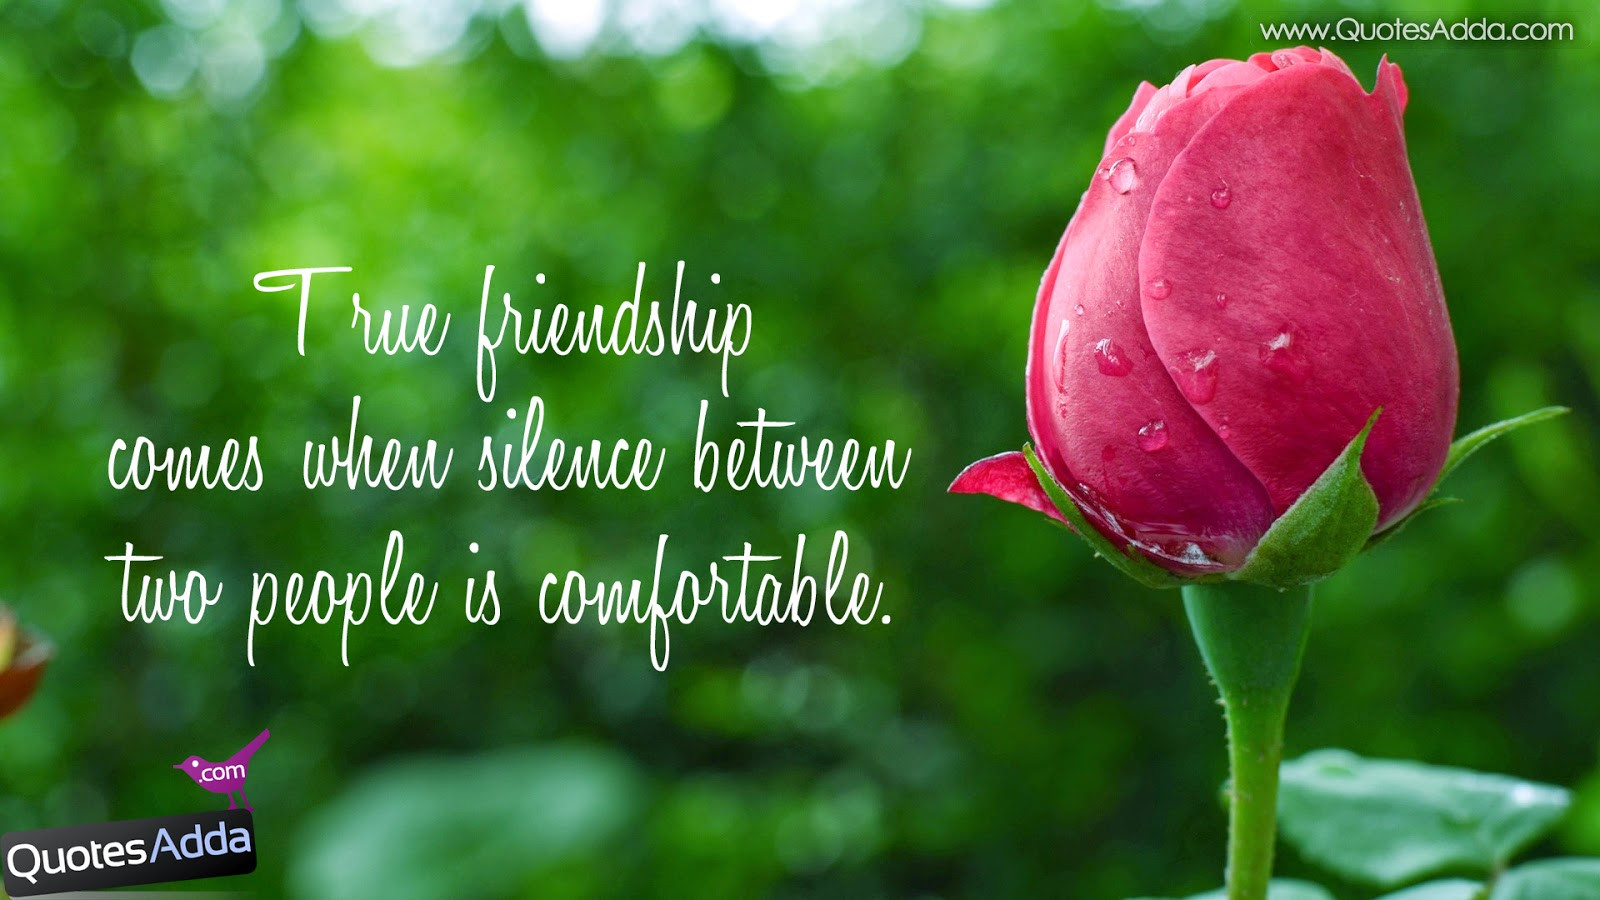 Friendship Quotes Wallpapers
 Best Friend Wallpapers Quotes WallpaperSafari